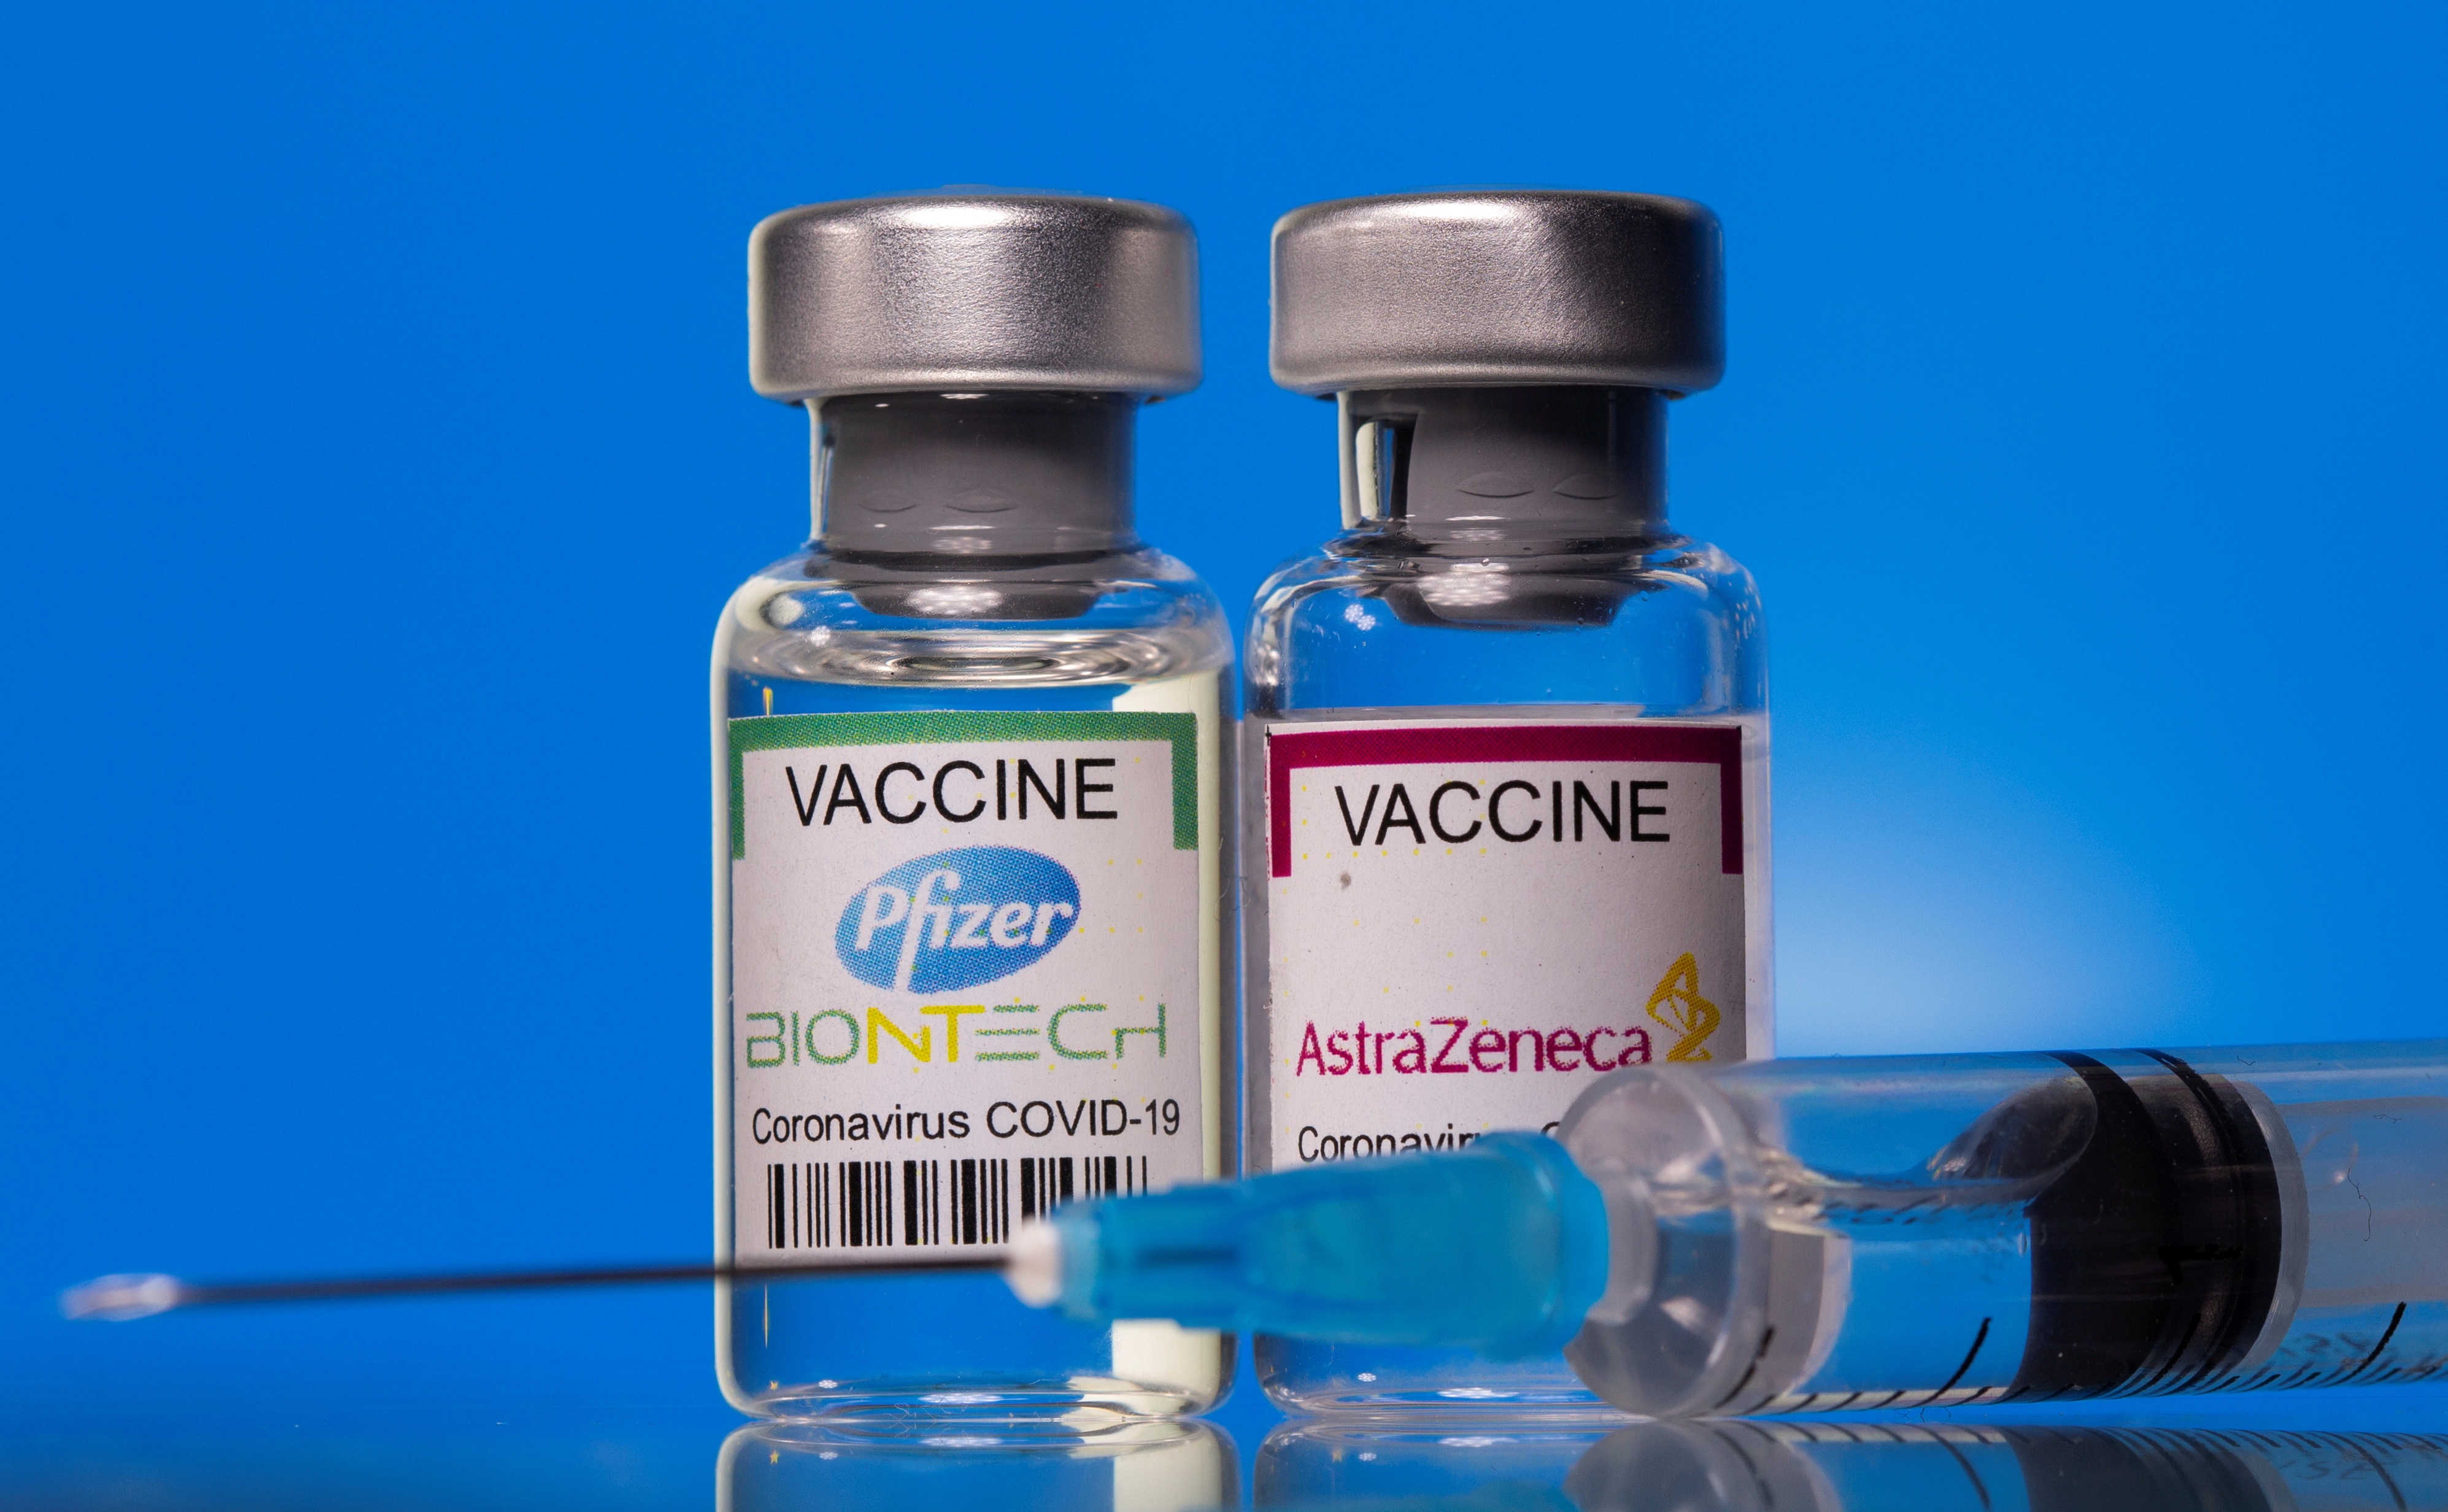 Vials with Pfizer-BioNTech and AstraZeneca COVID-19 vaccine labels are seen in this illustration picture taken March 19, 2021. REUTERS/Dado Ruvic/Illustration